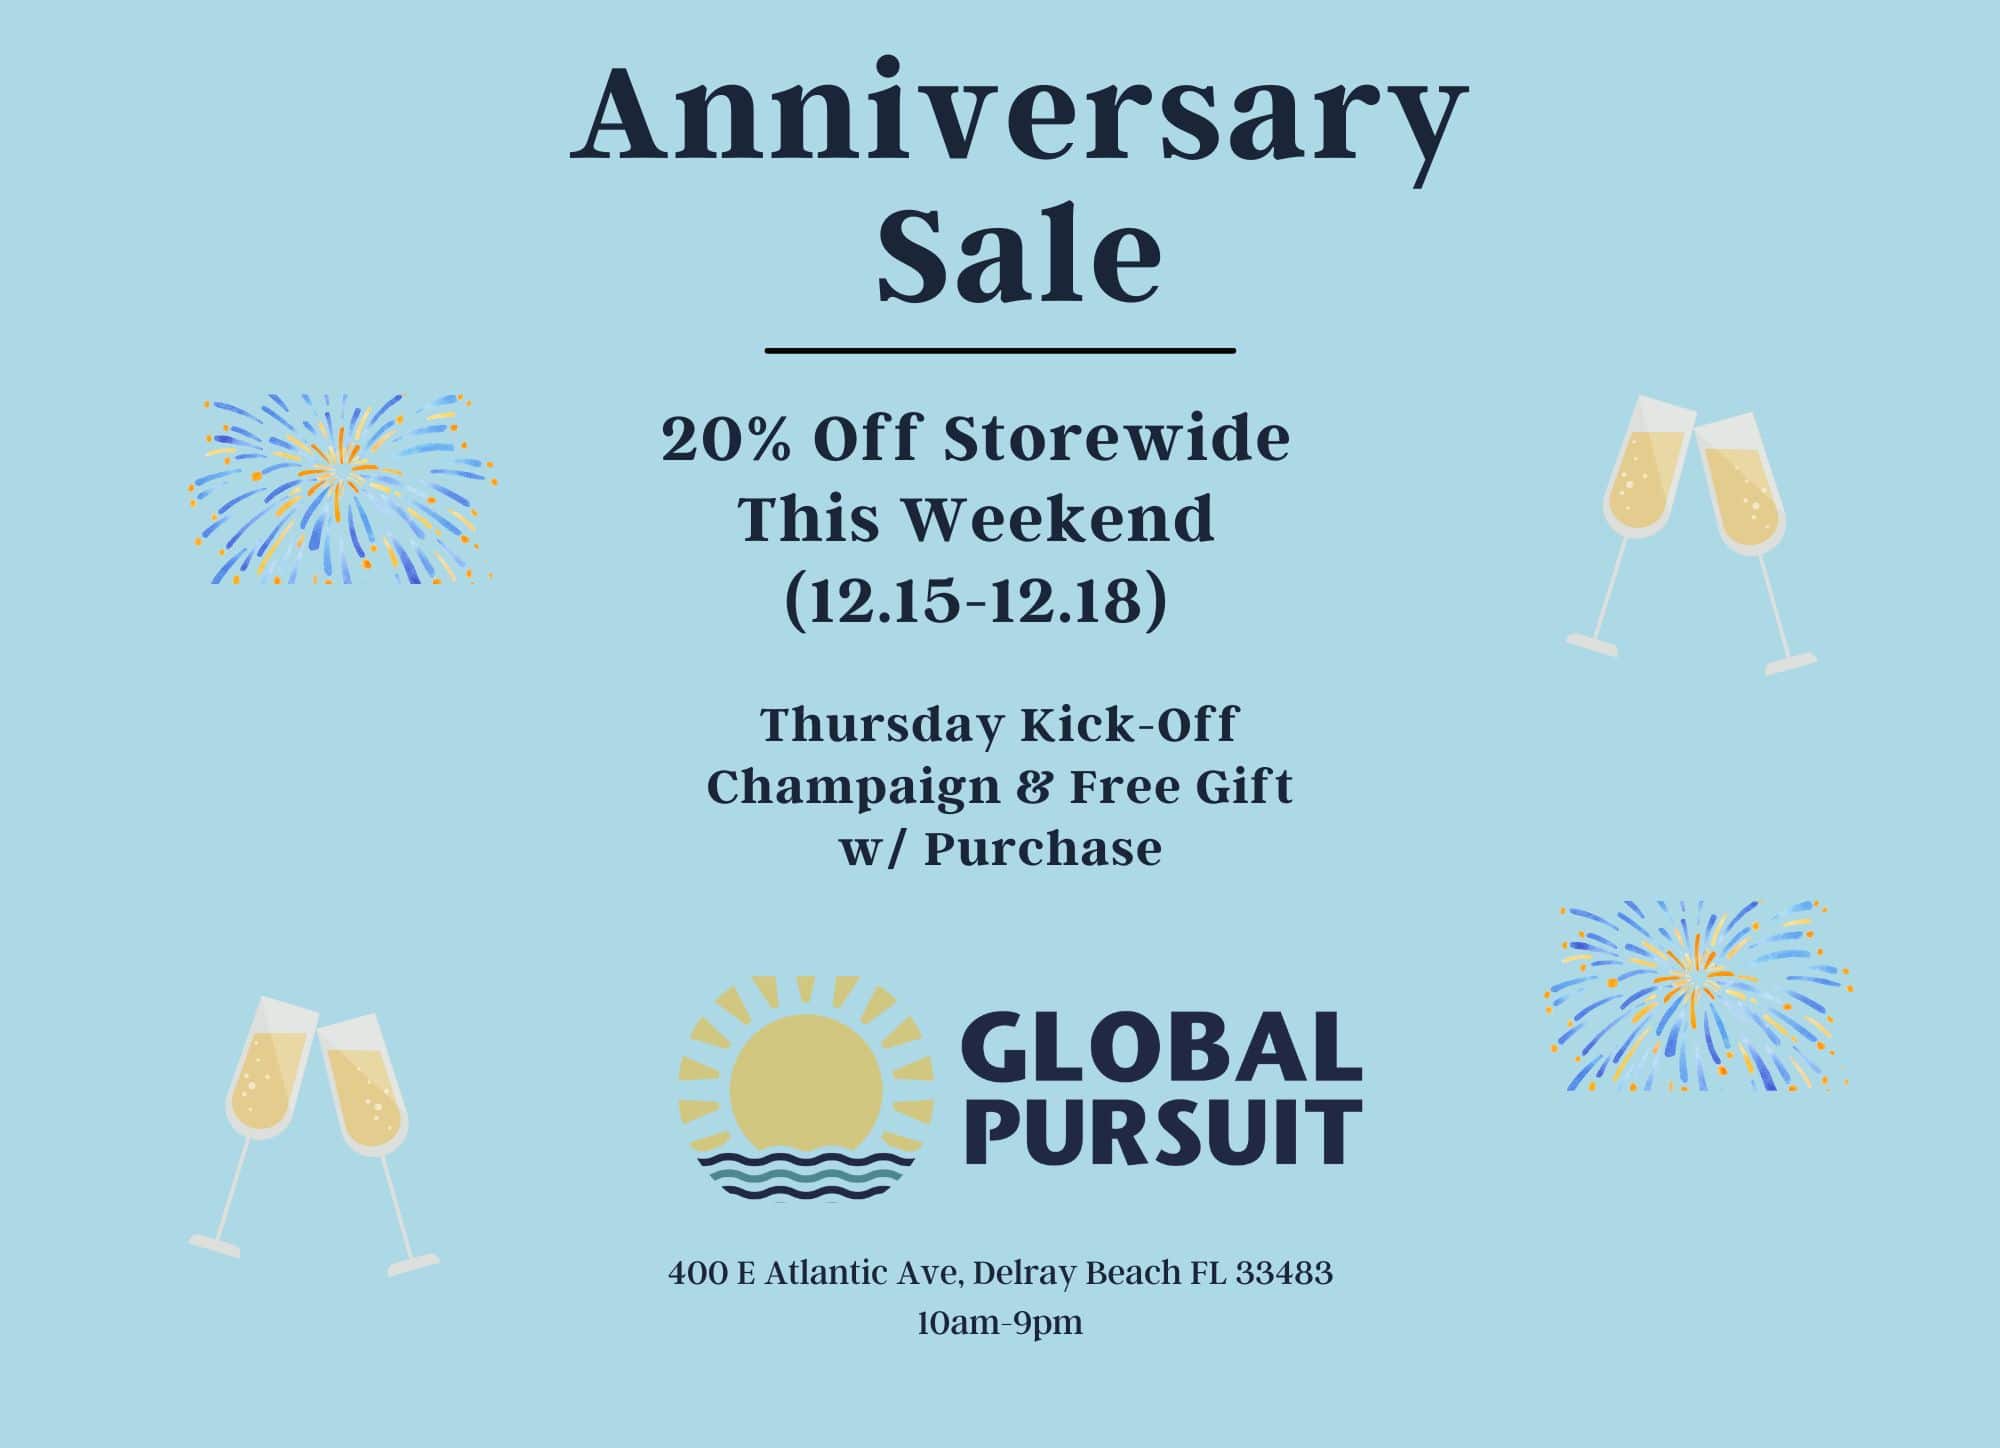 Advertisement for Global Pursuit of Delray's Anniversary Sale